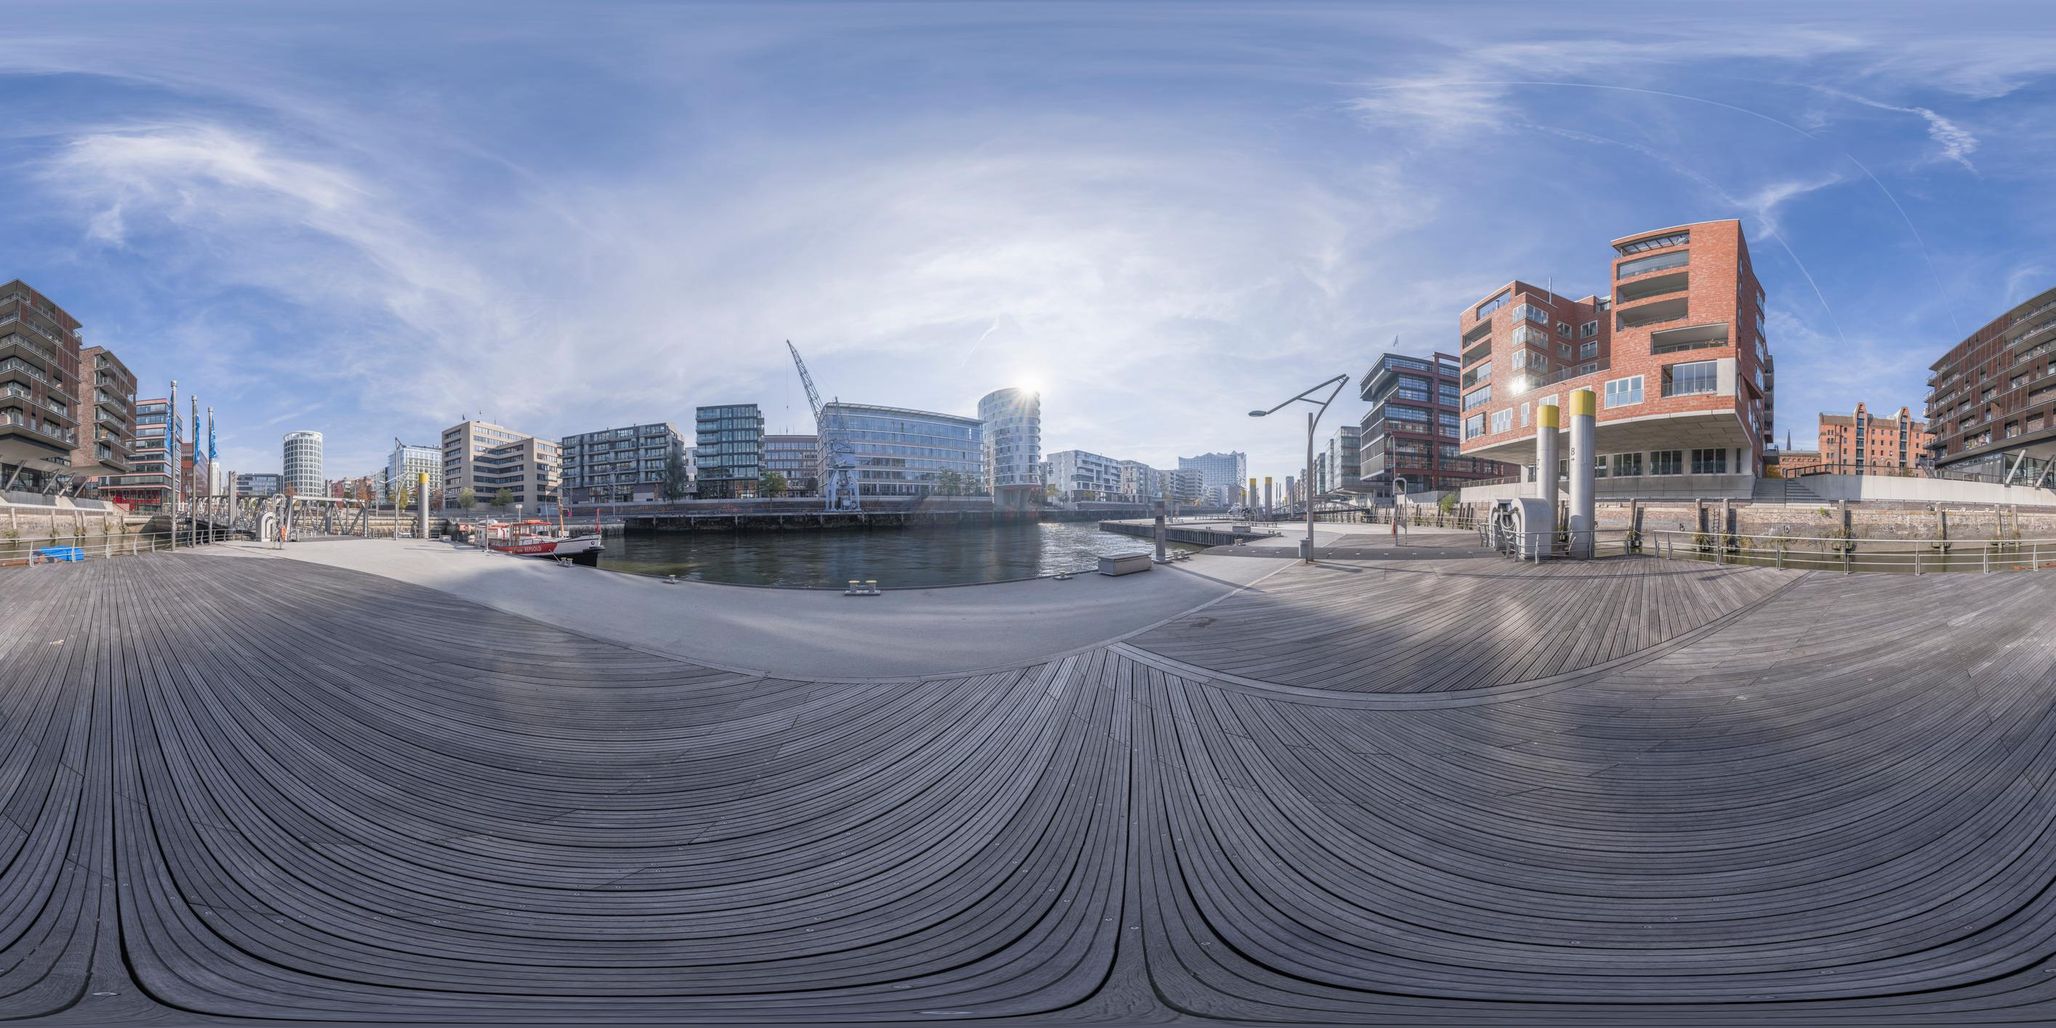 Germany's Architectural Gem: A City by the Harbor - HDRi Maps and ...